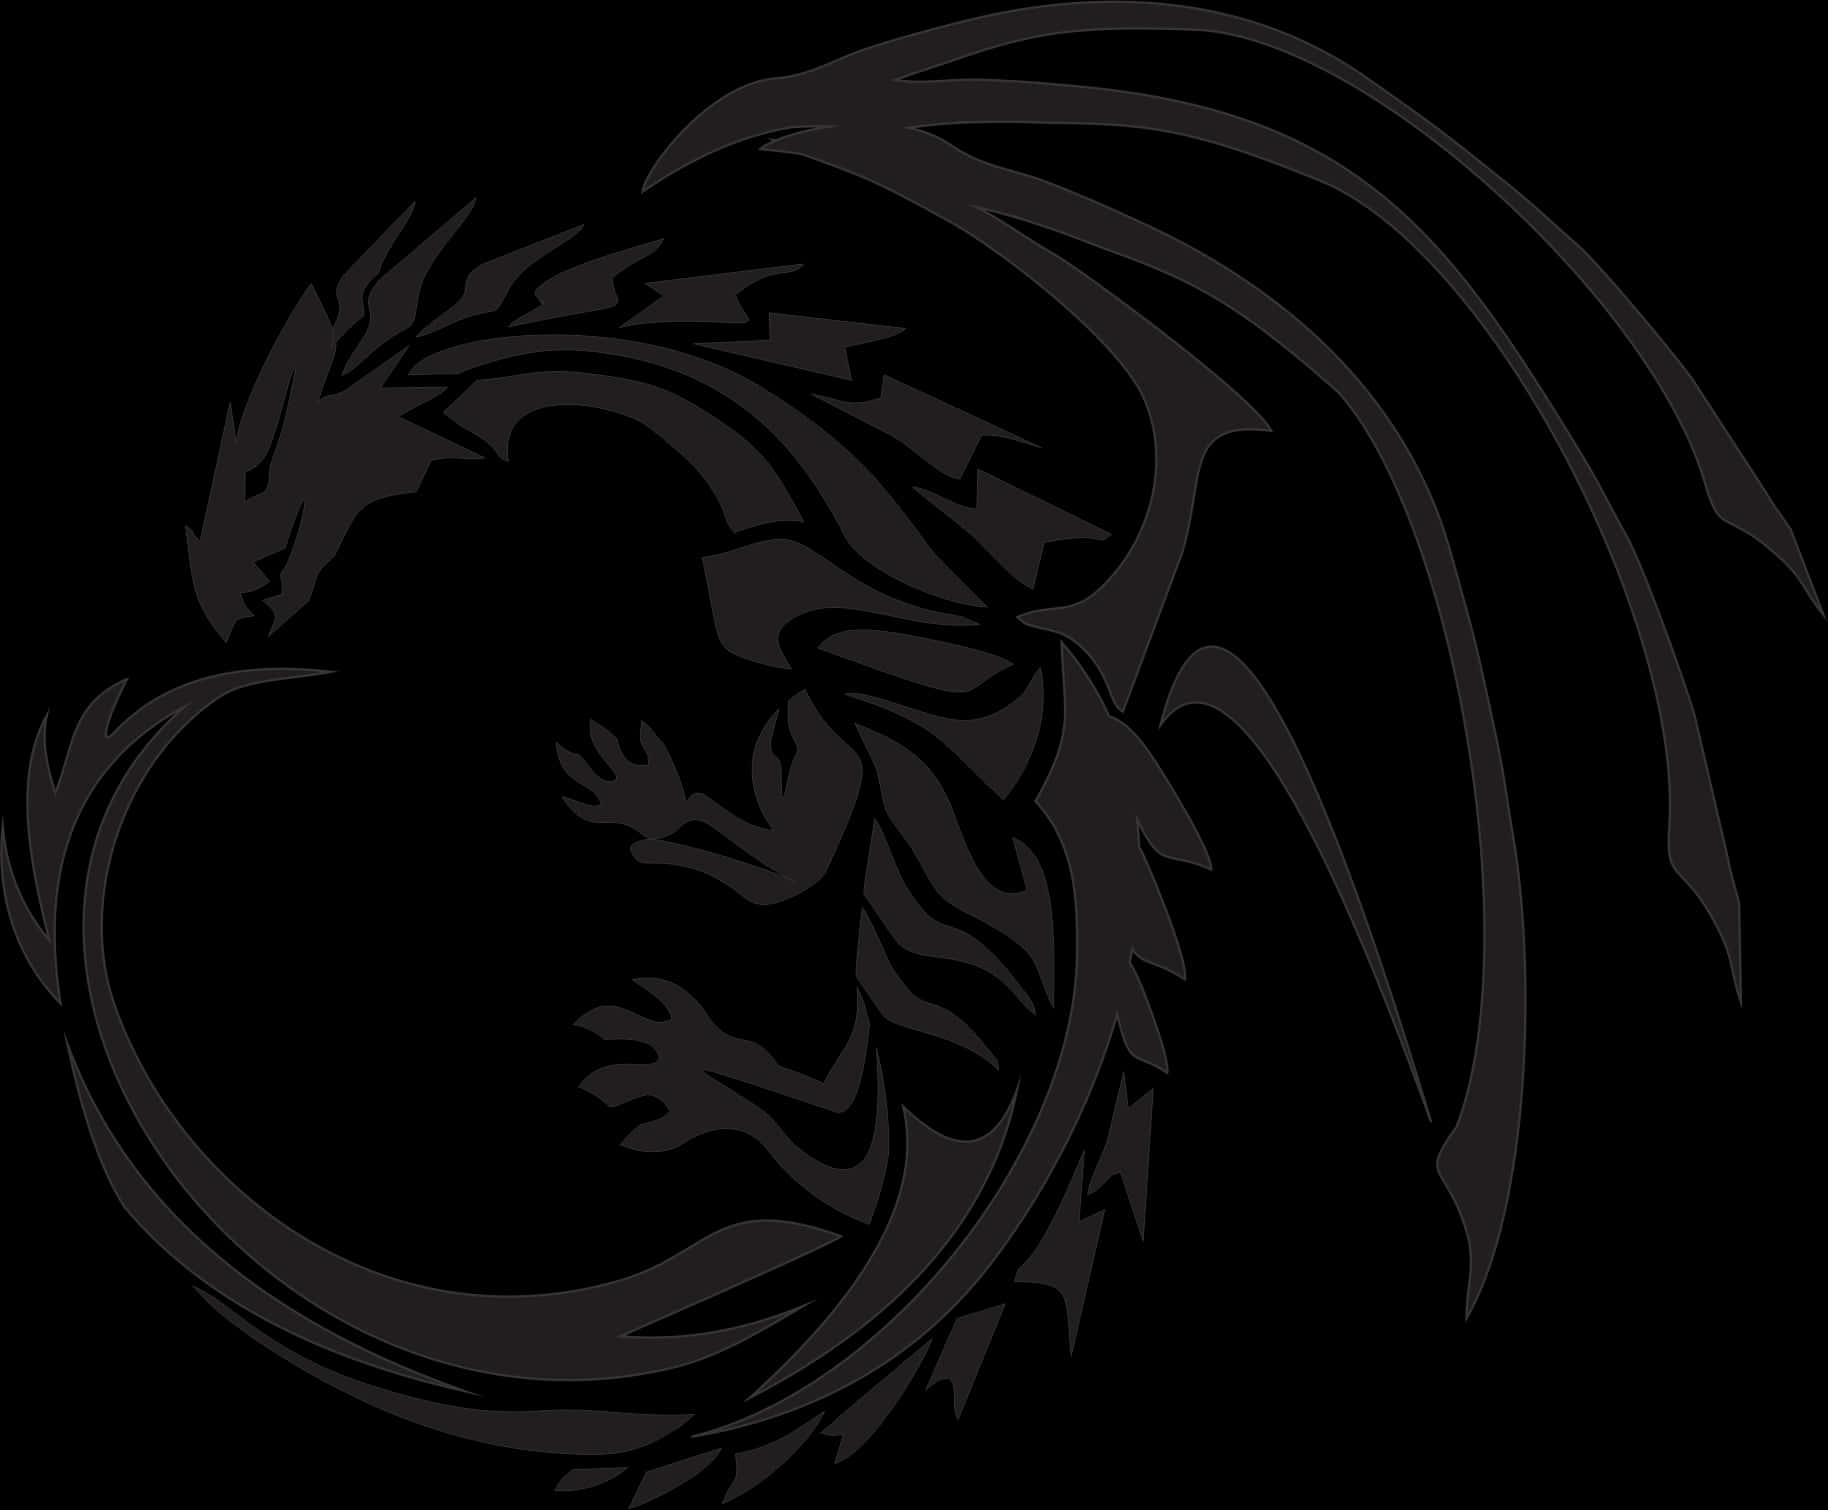 Abstract Black Dragon Silhouette PNG image